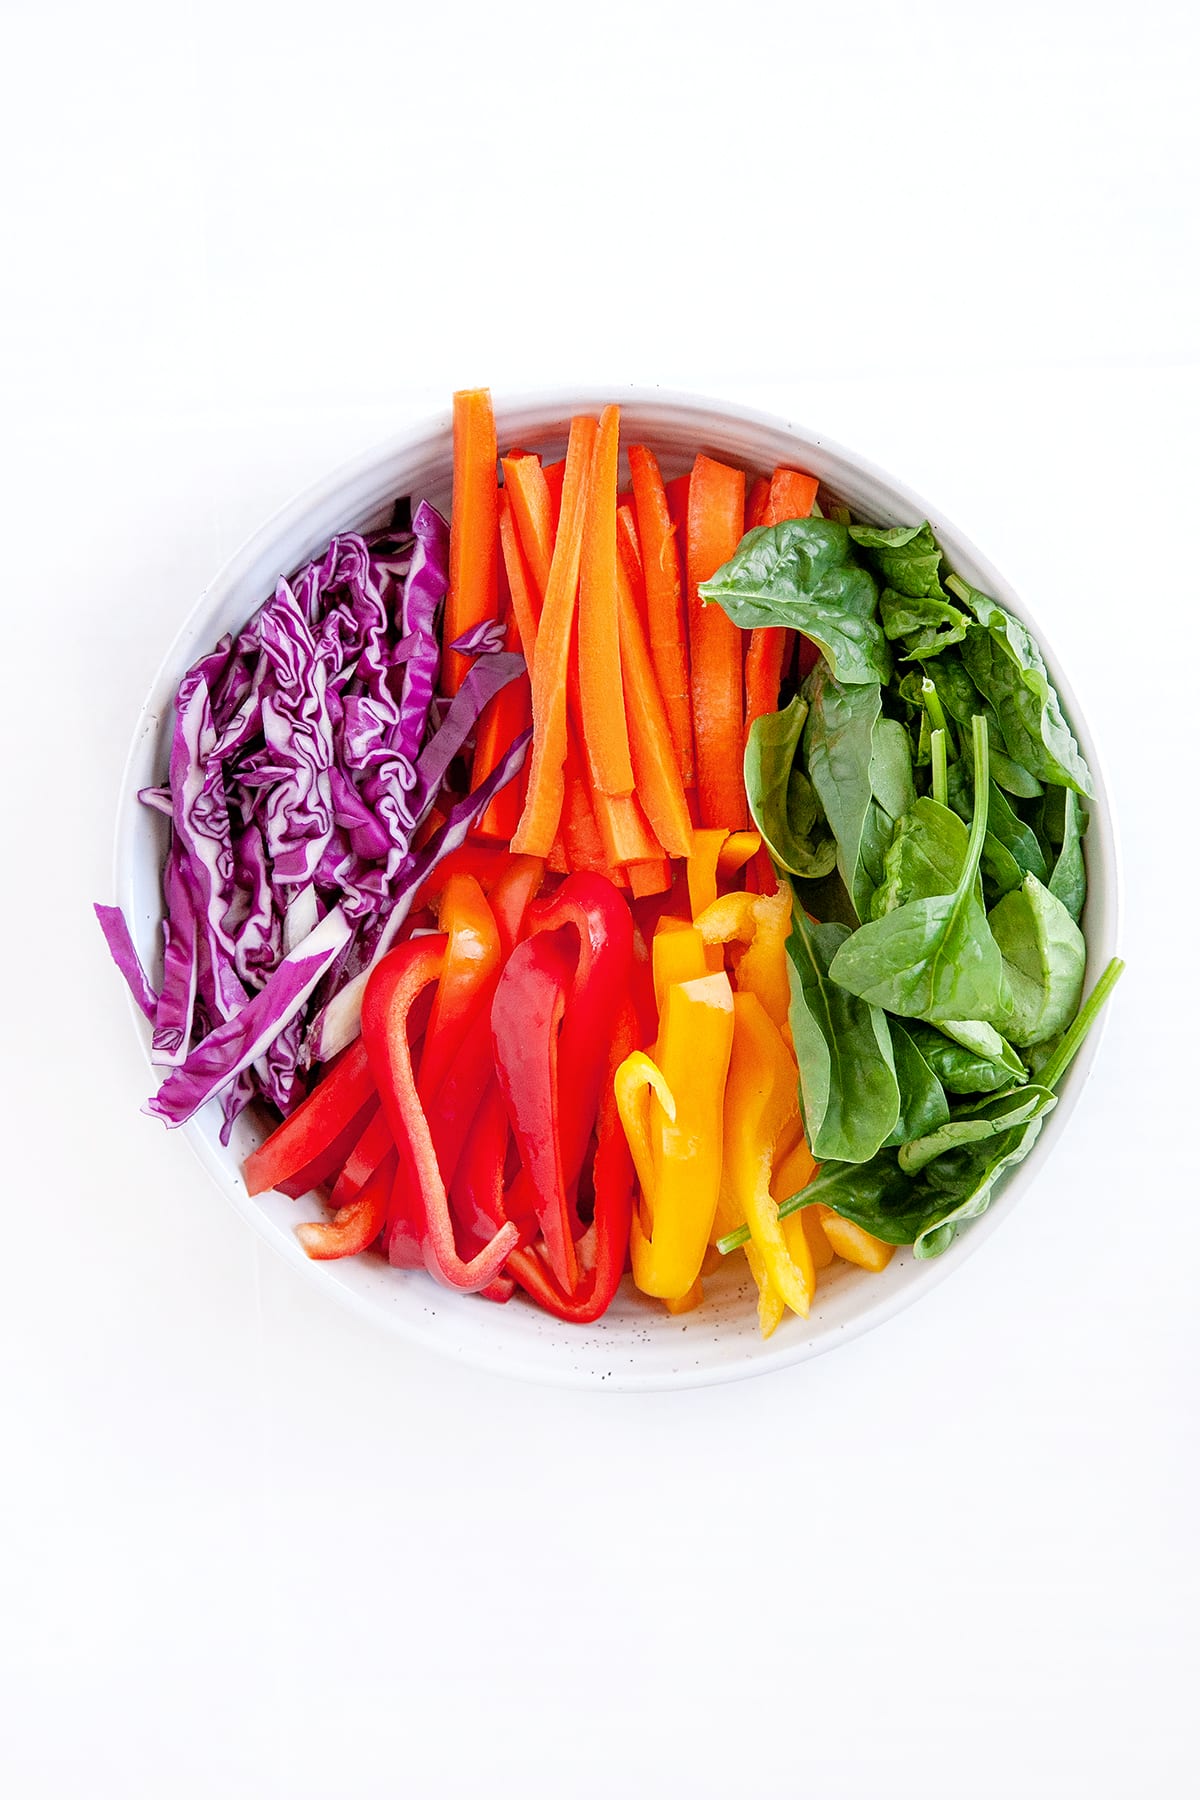 Bright vegetables in a dish like a rainbow.